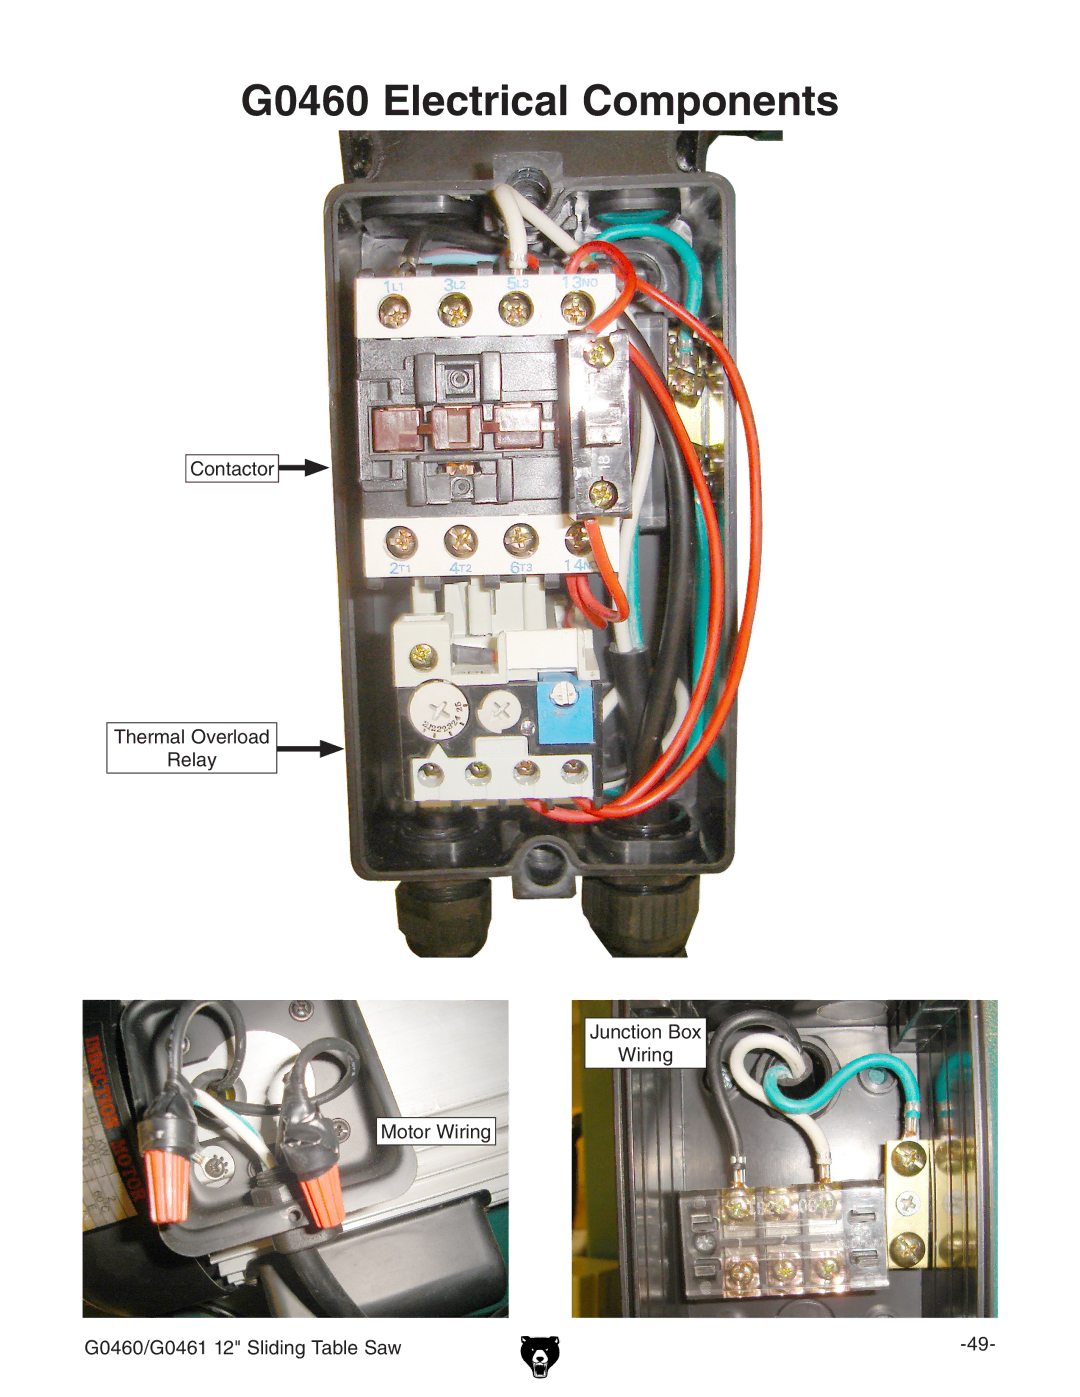 Grizzly G0461 owner manual G0460 Electrical Components 